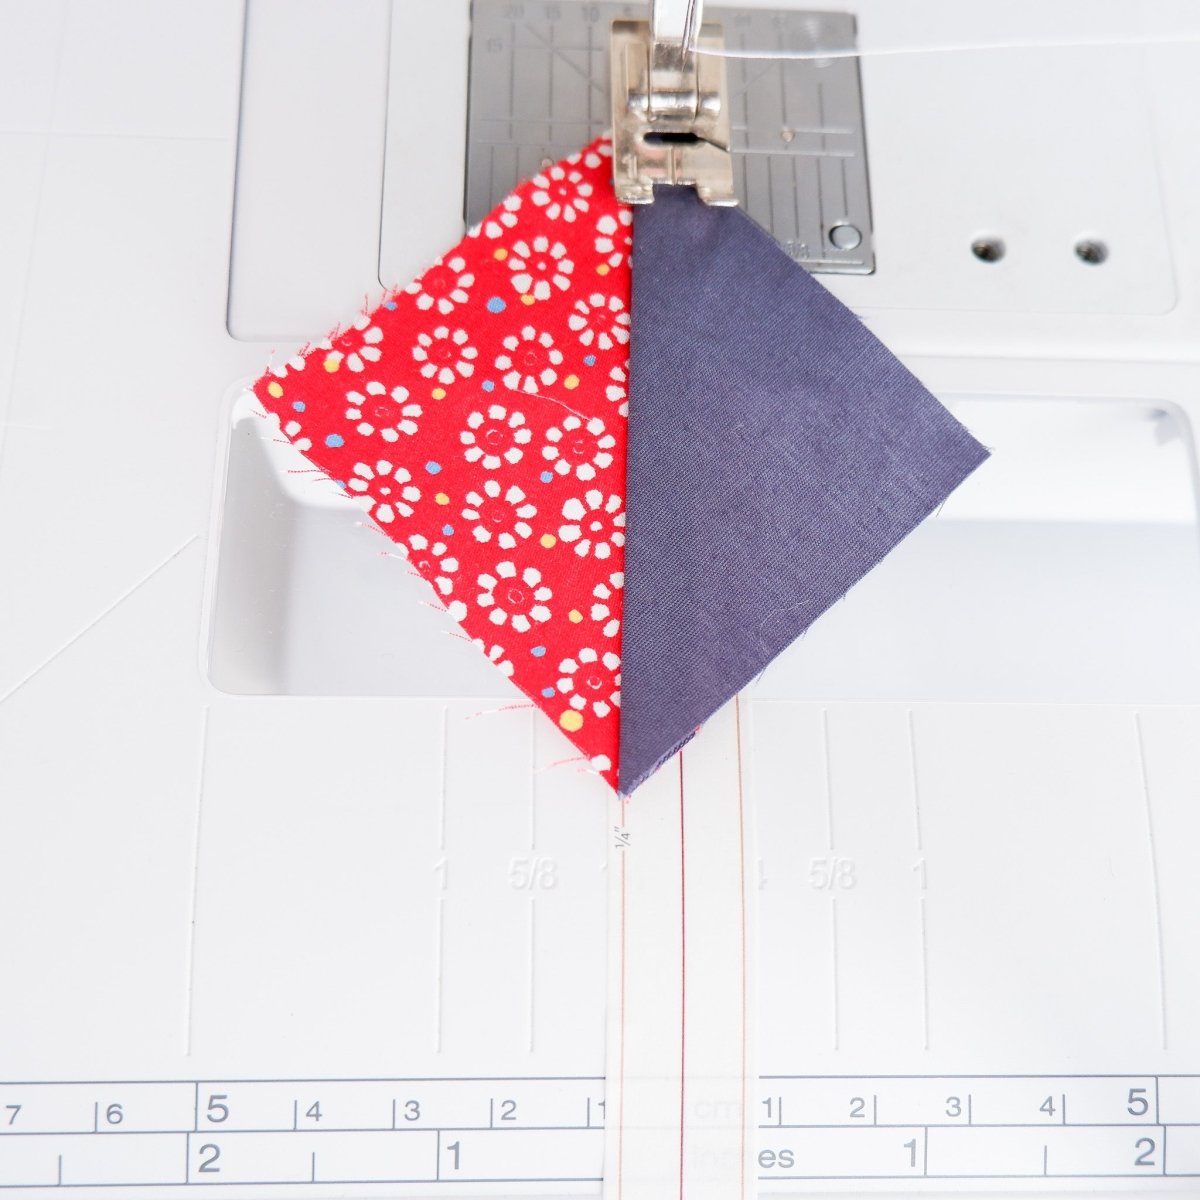 Sewing while using the Quarter Inch Seam Tape as a guide